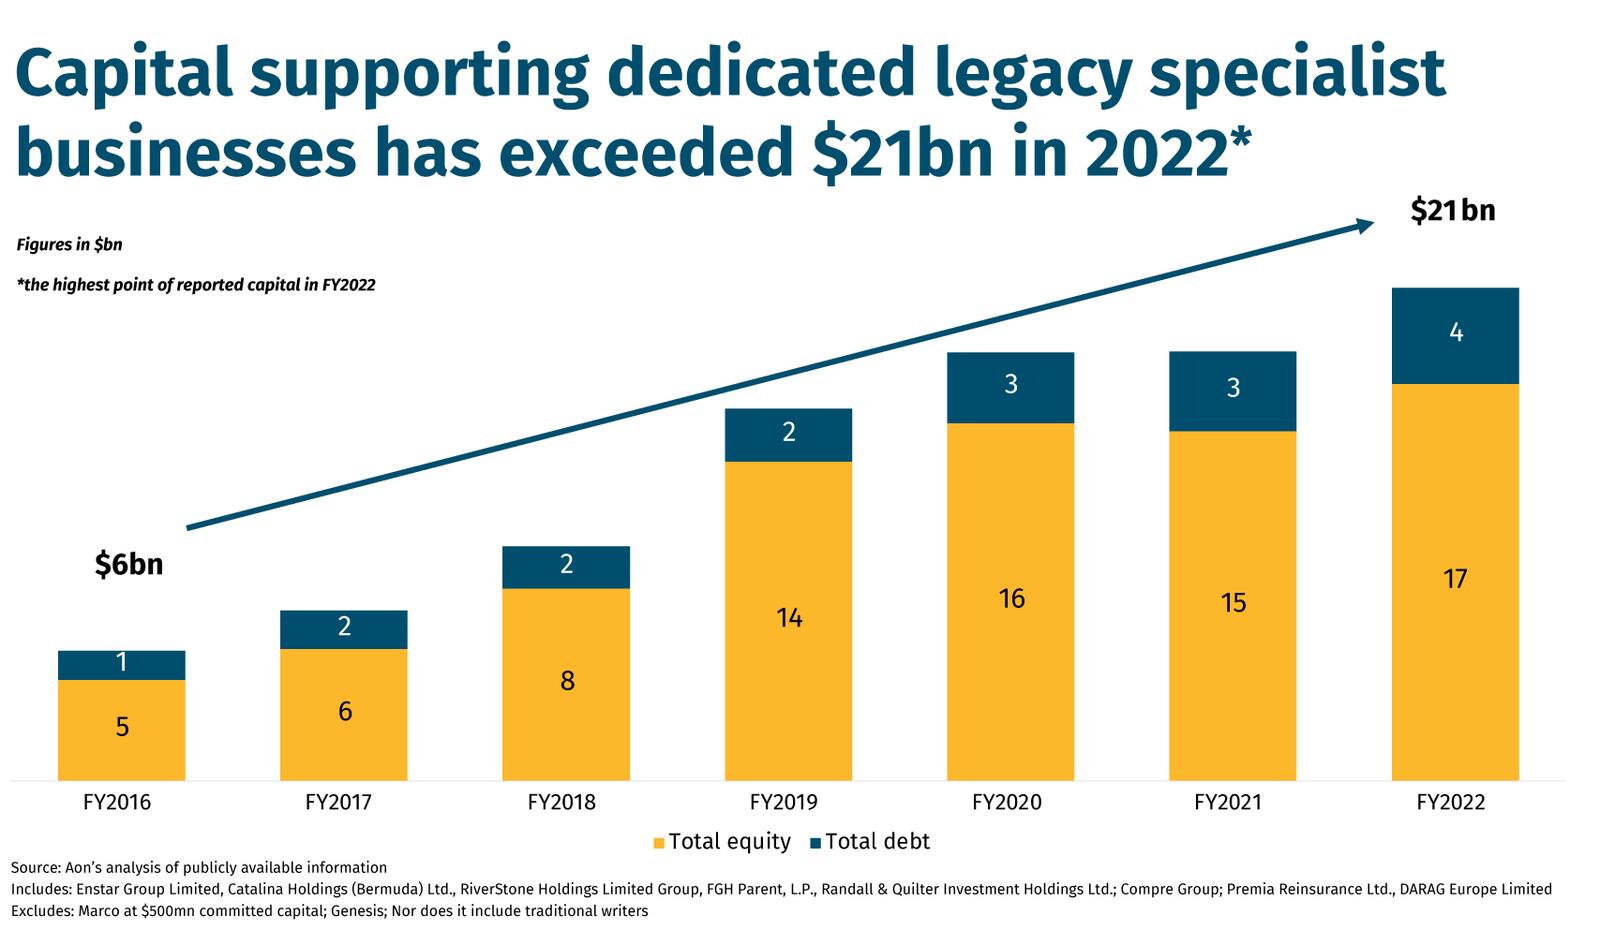 Capital supporting dedicated legacy specialist businesses has exceeded $21bn in 2022*